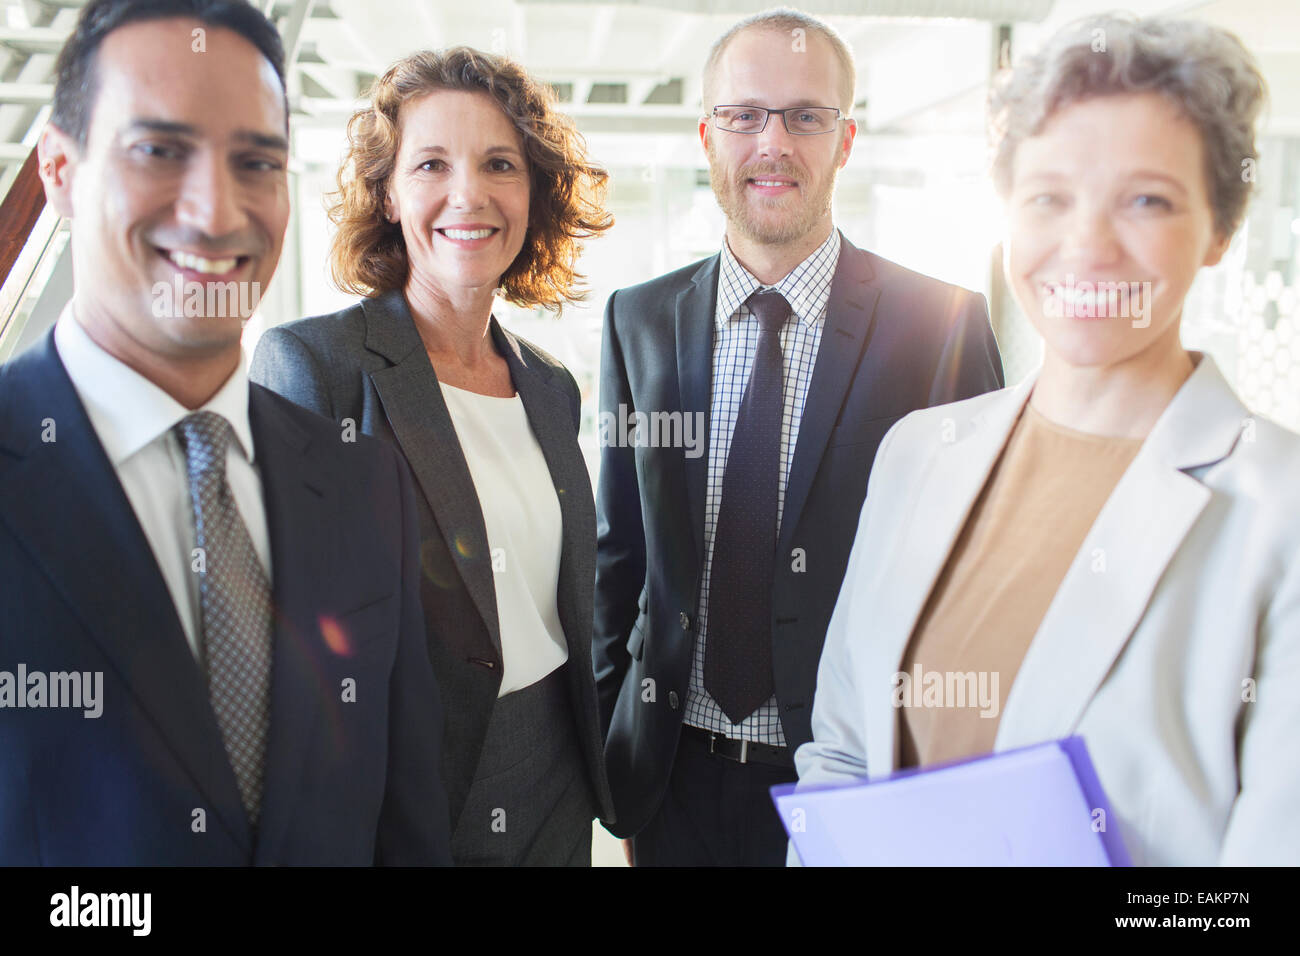 Group portrait of successful office team Stock Photo